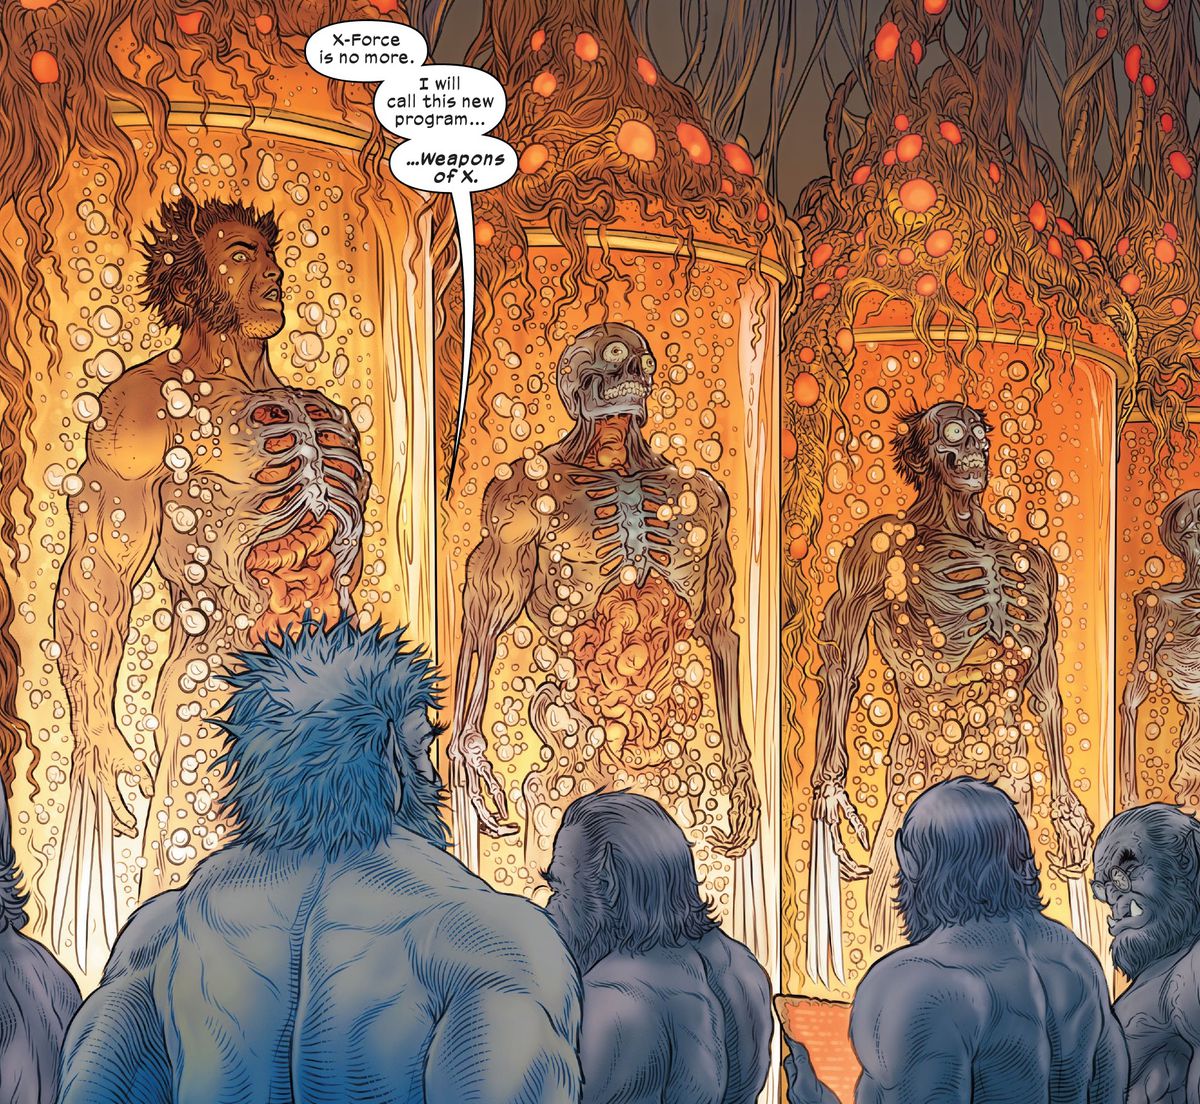 “X-Force is no more,” Beast says to four other Beast clones who are overseeing several vats of growing Wolverine clones. “I will call this new program... Weapons of X,” in Wolverine #31 (2023).